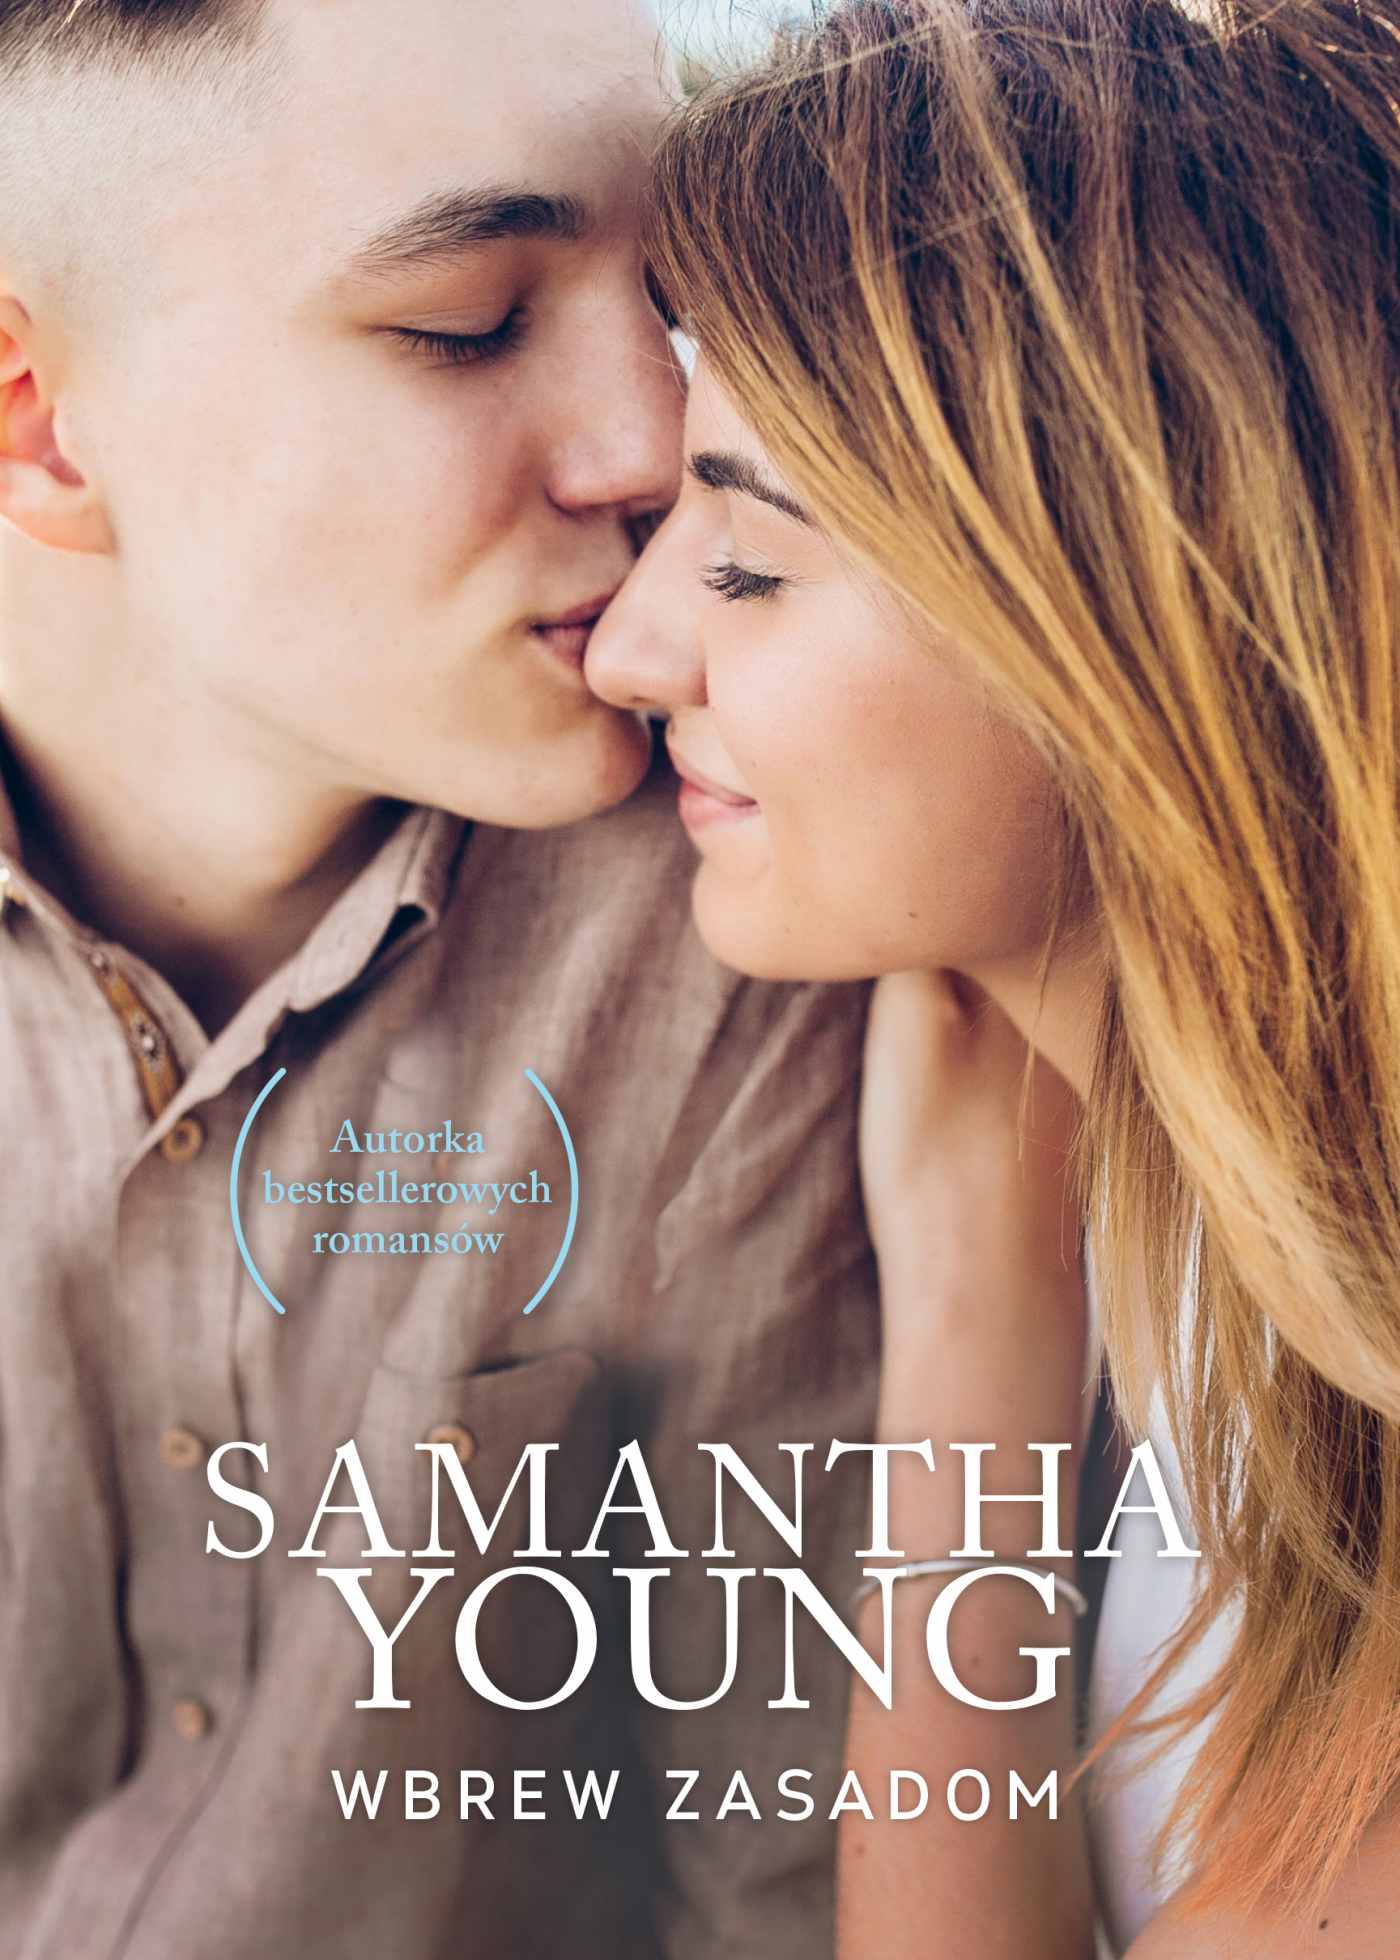 much ado about you by samantha young